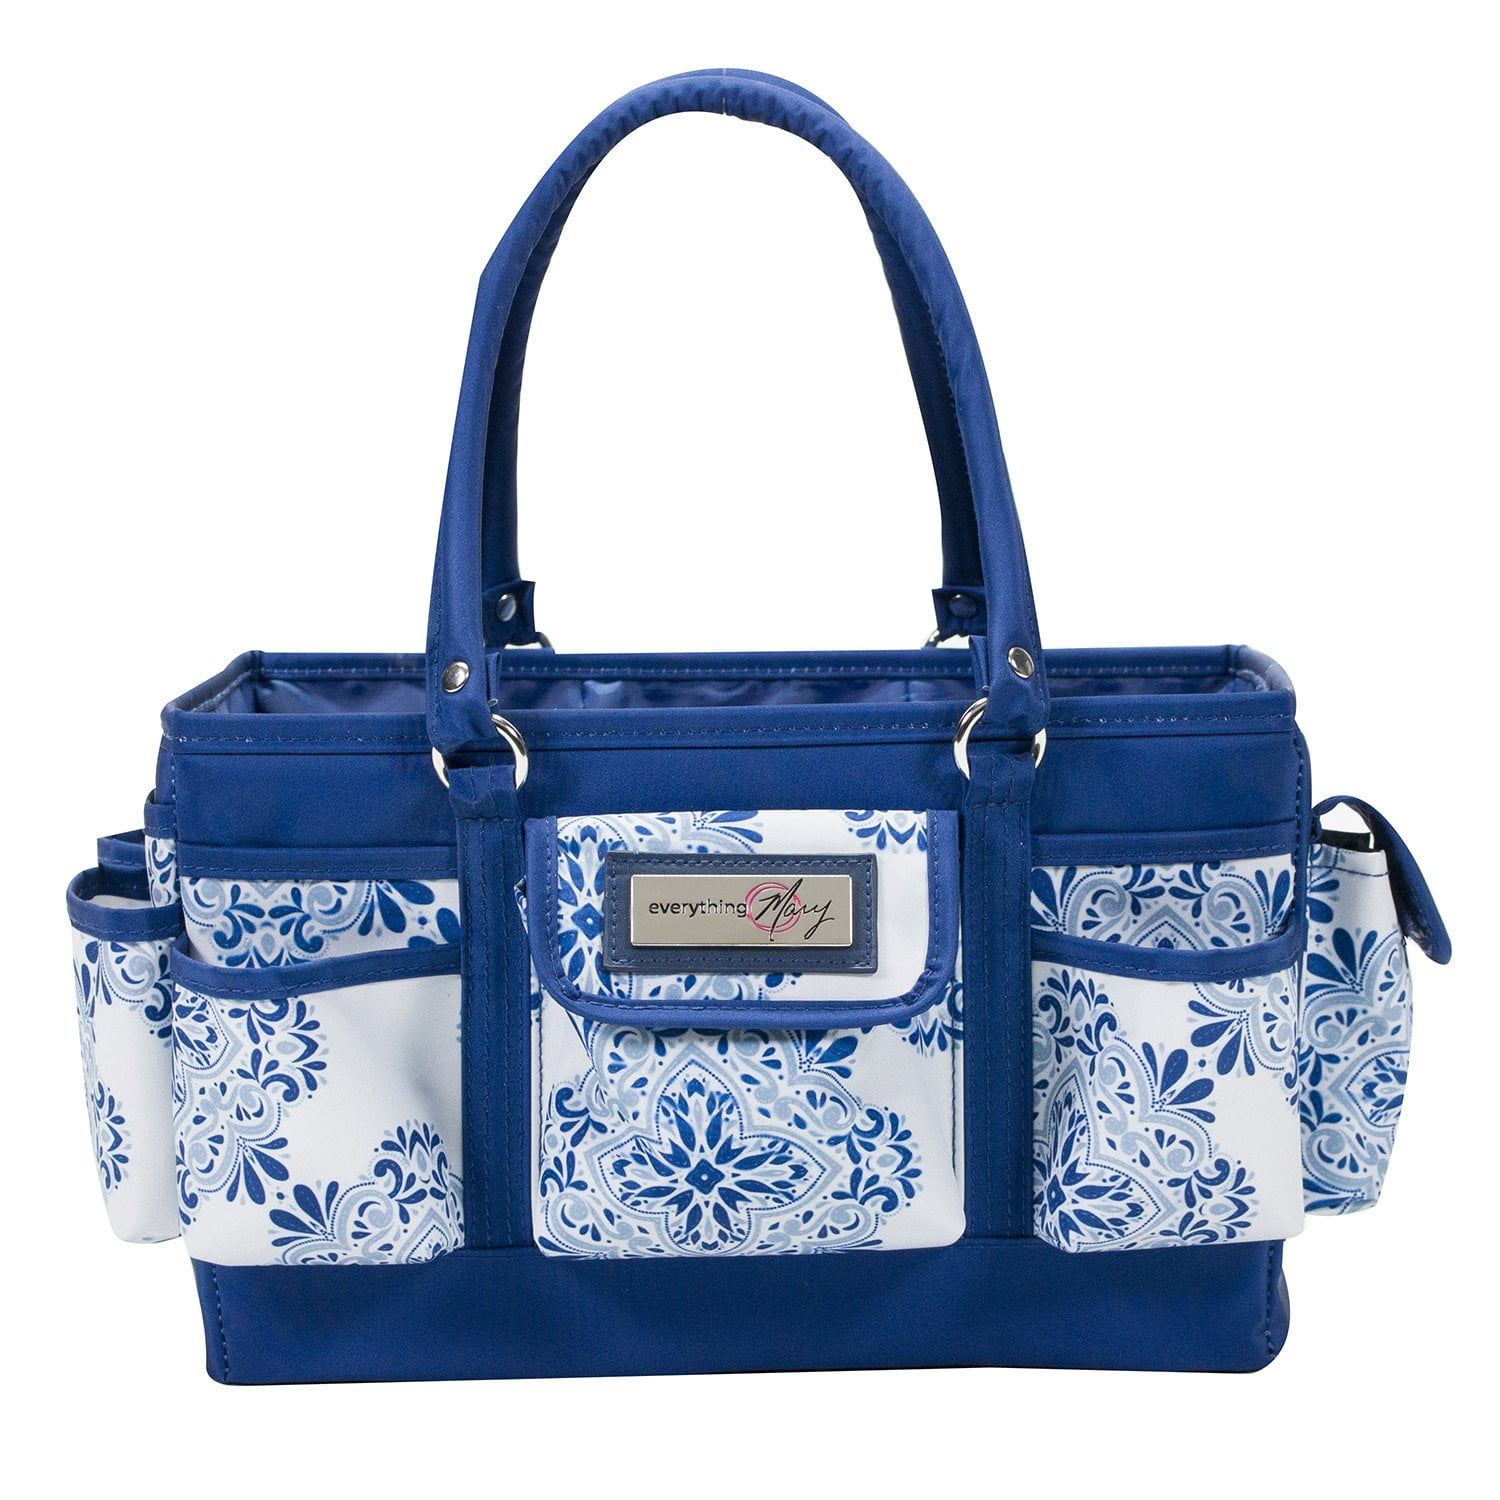 Everything Mary Blue Deluxe Store and Tote - Storage Craft Bag